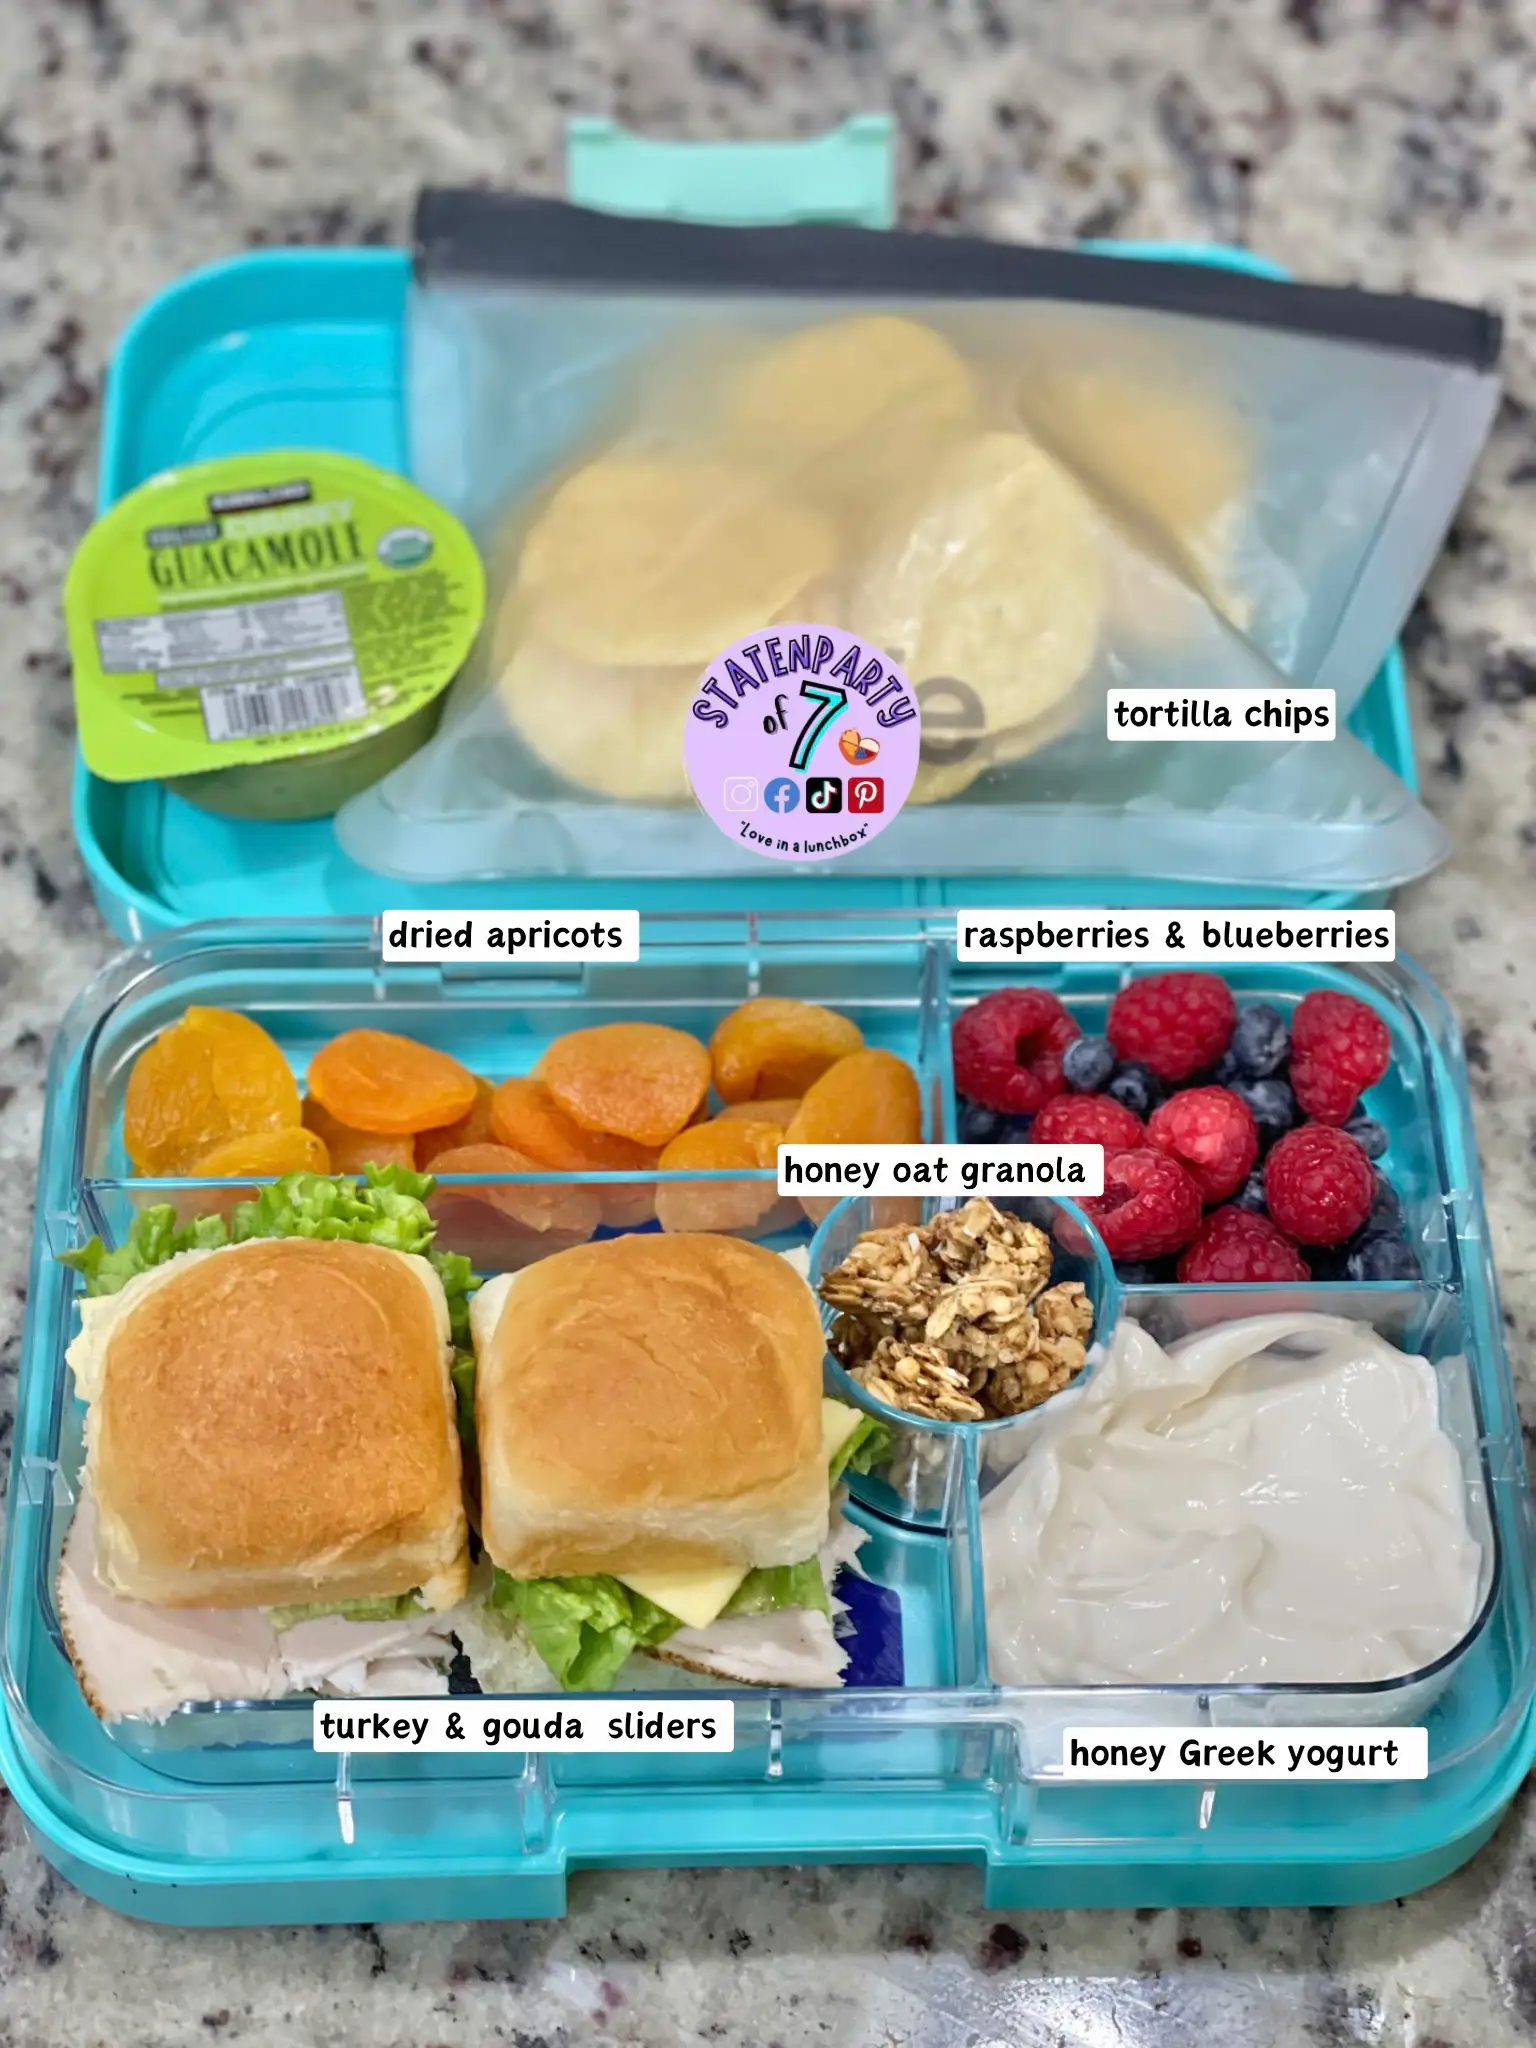 Herbed Goat Cheese Rainbow Snack Boxes - Project Meal Plan, Snack Boxes  Containers